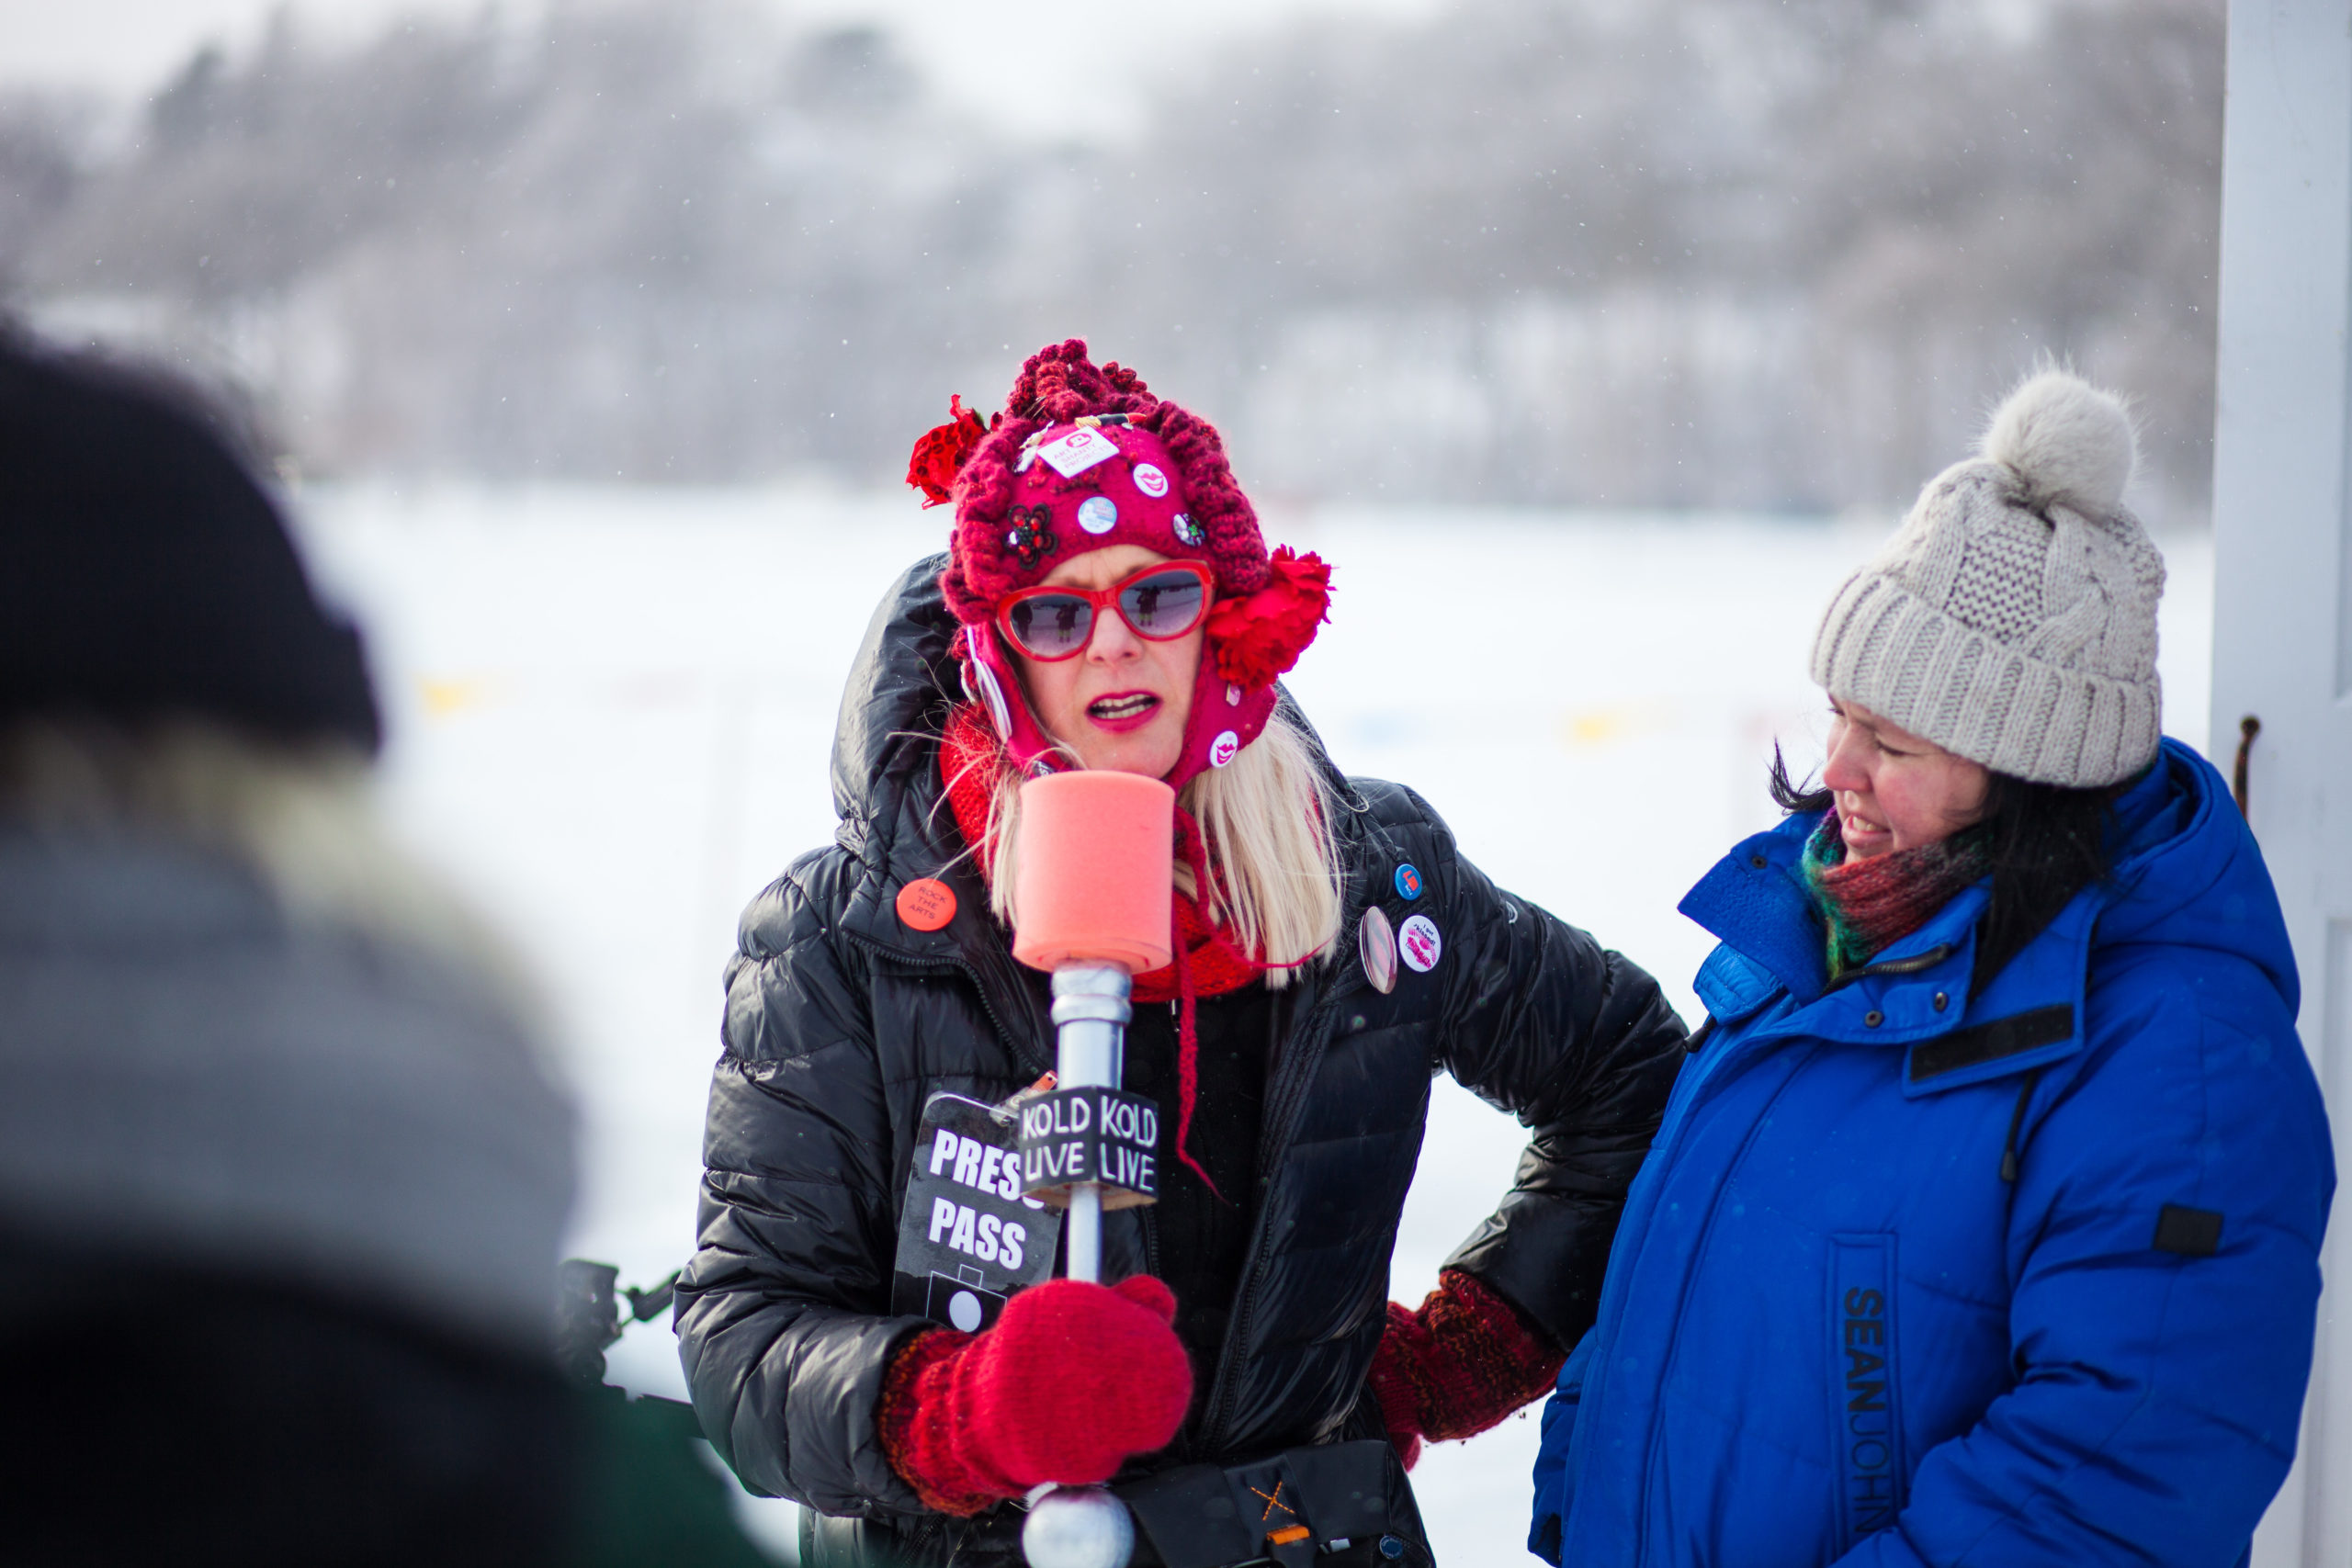 Bundled up and wearing red sunglasses, Patty Pucker holds an oversized prop microphone, brow furrowed slightly and one arm on her hip. A person in a blue parka standing next to her listens thoughtfully.